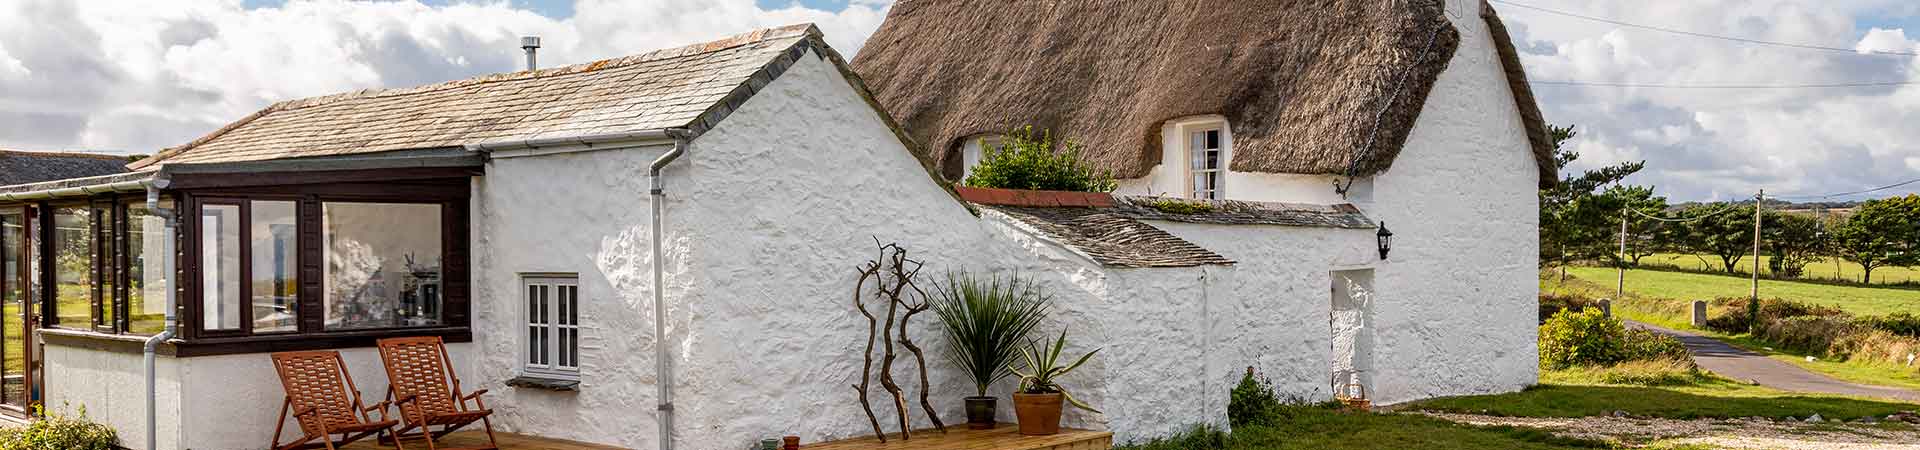 Thatched holiday cottages in Warwickshire